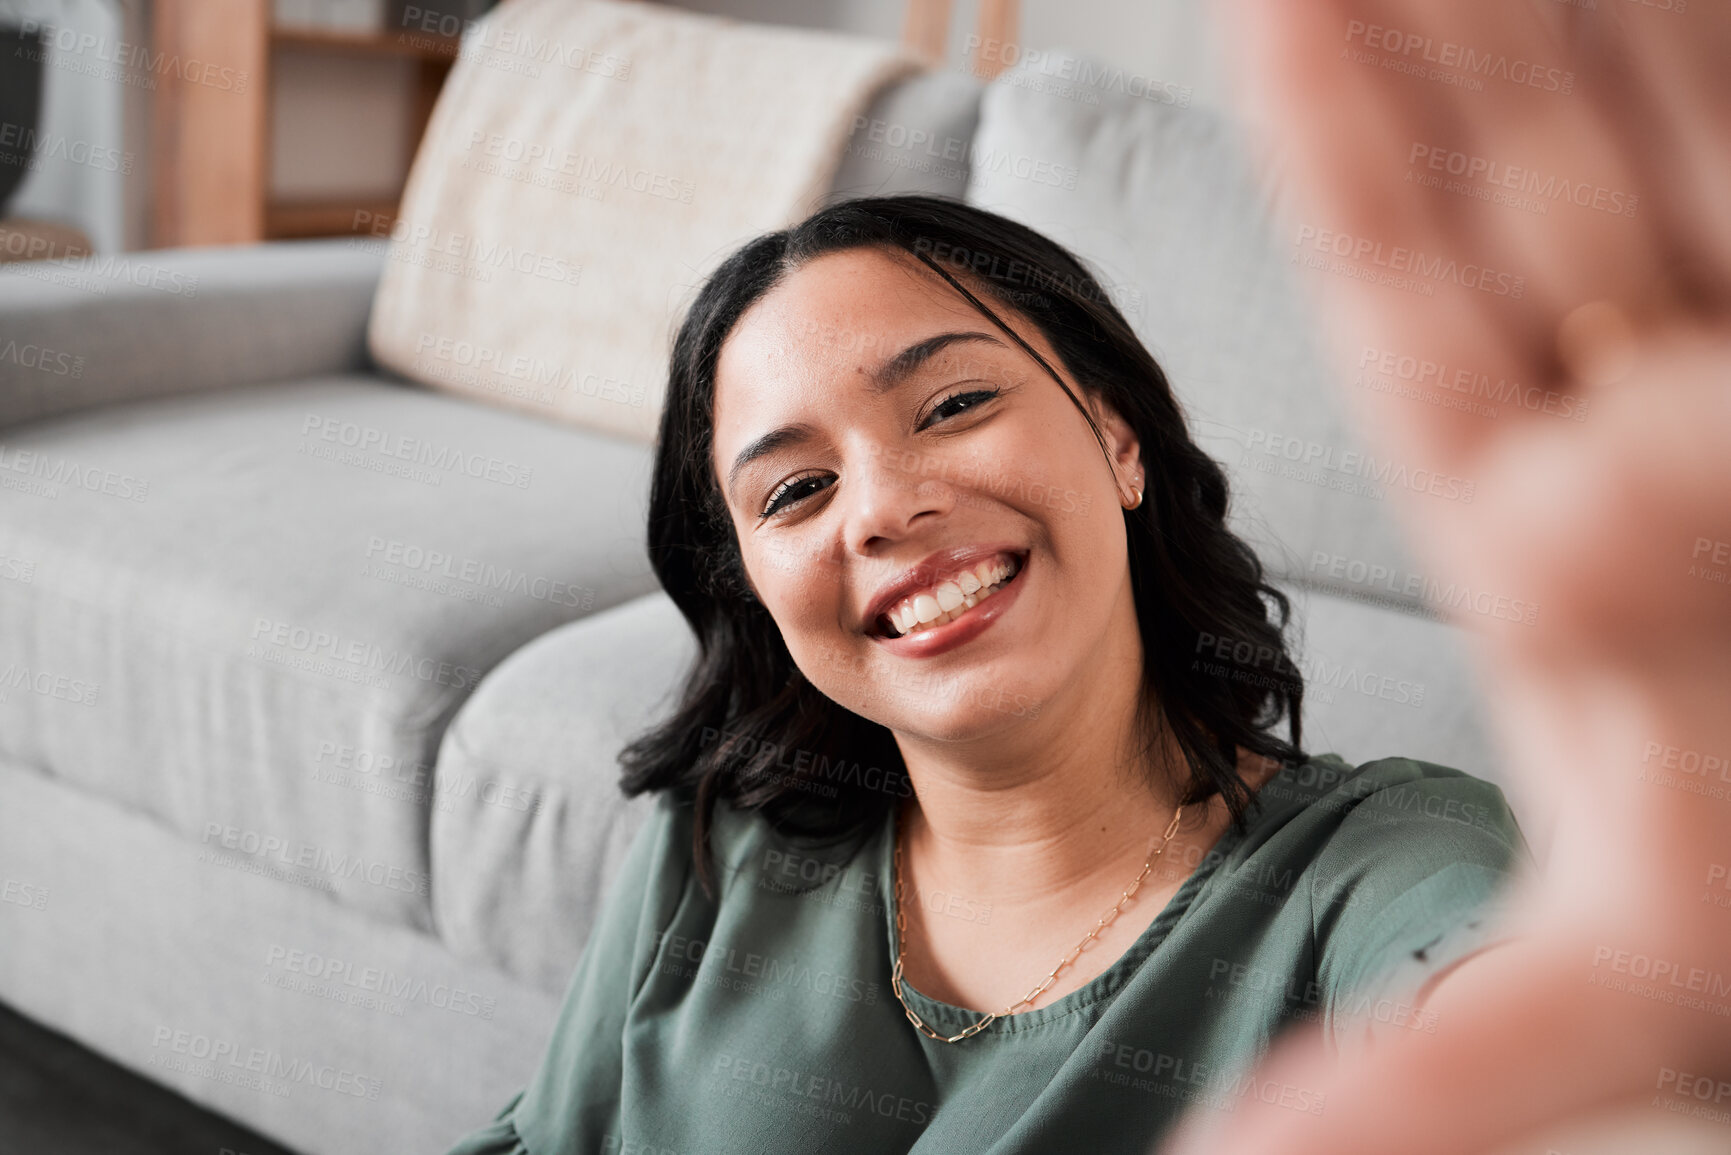 Buy stock photo Selfie, happy and portrait of a woman in her living room relaxing, resting or chilling by the sofa. Happiness, smile and young female person from Mexico taking a picture at her modern home apartment.